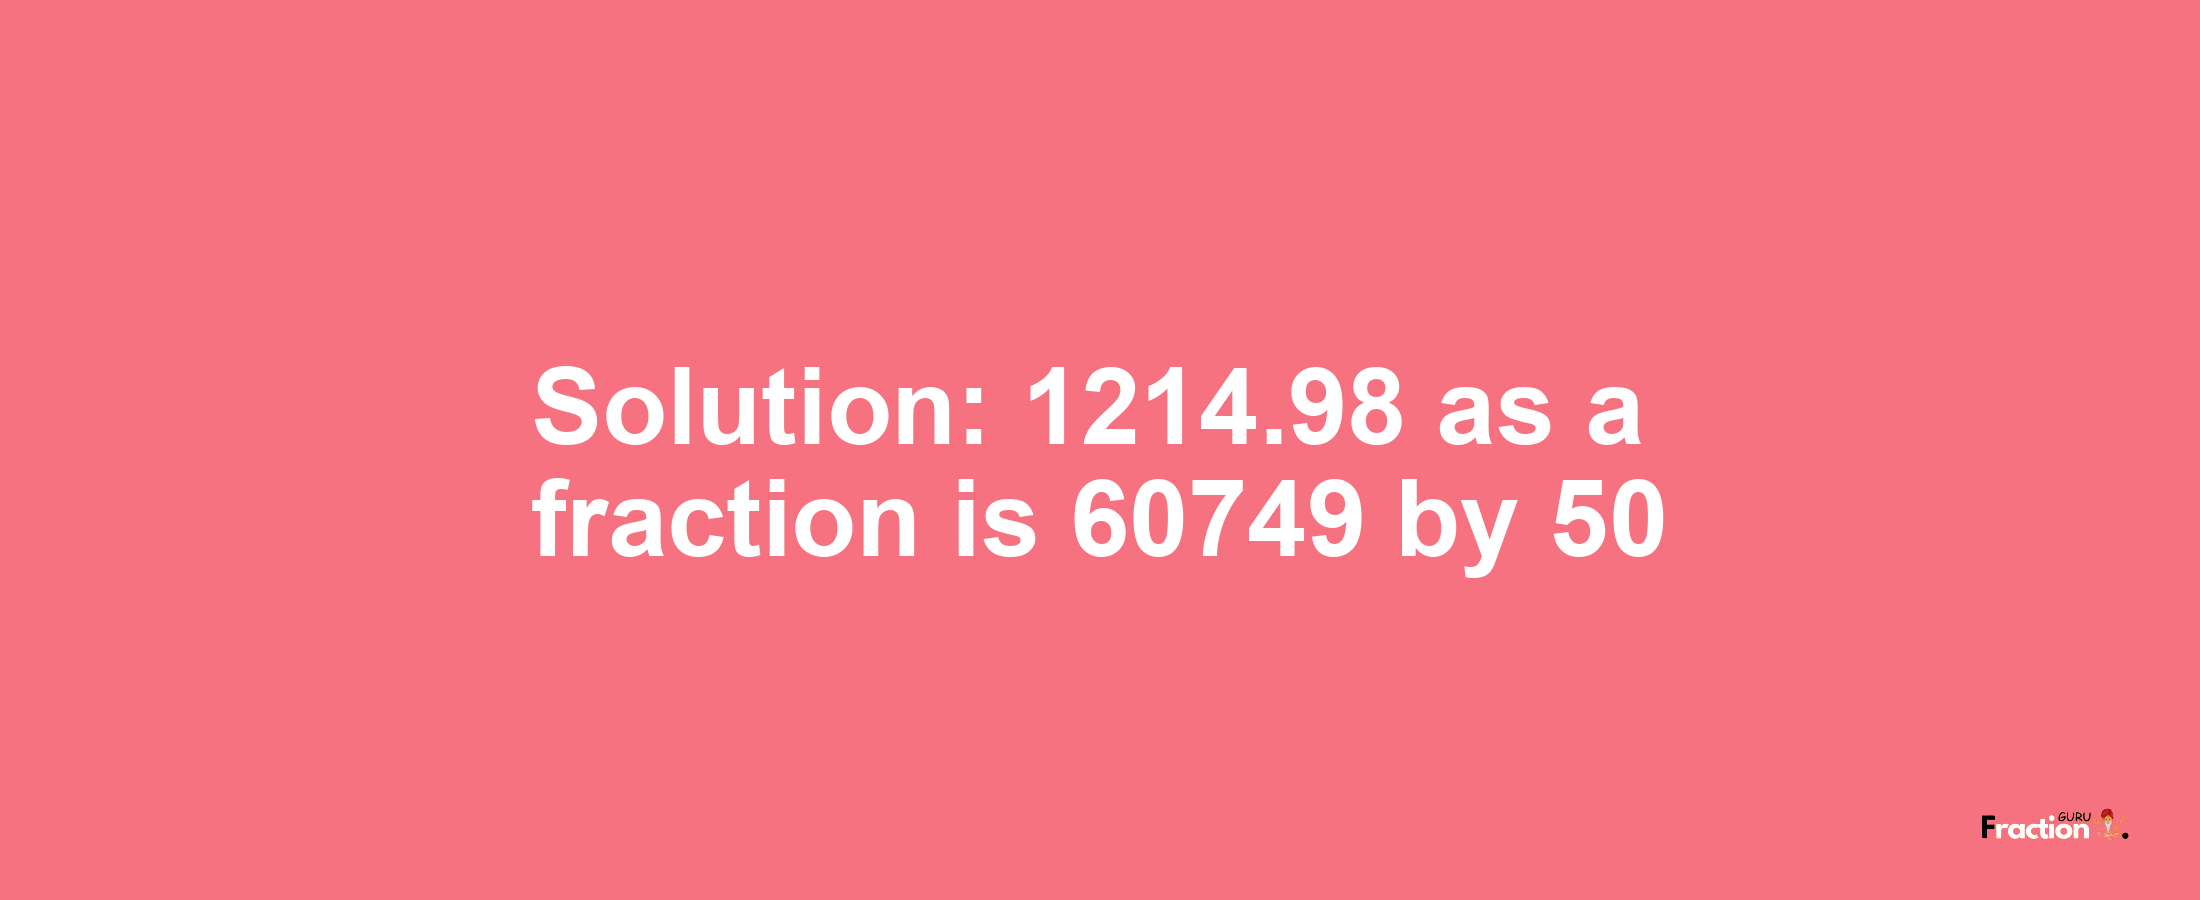 Solution:1214.98 as a fraction is 60749/50